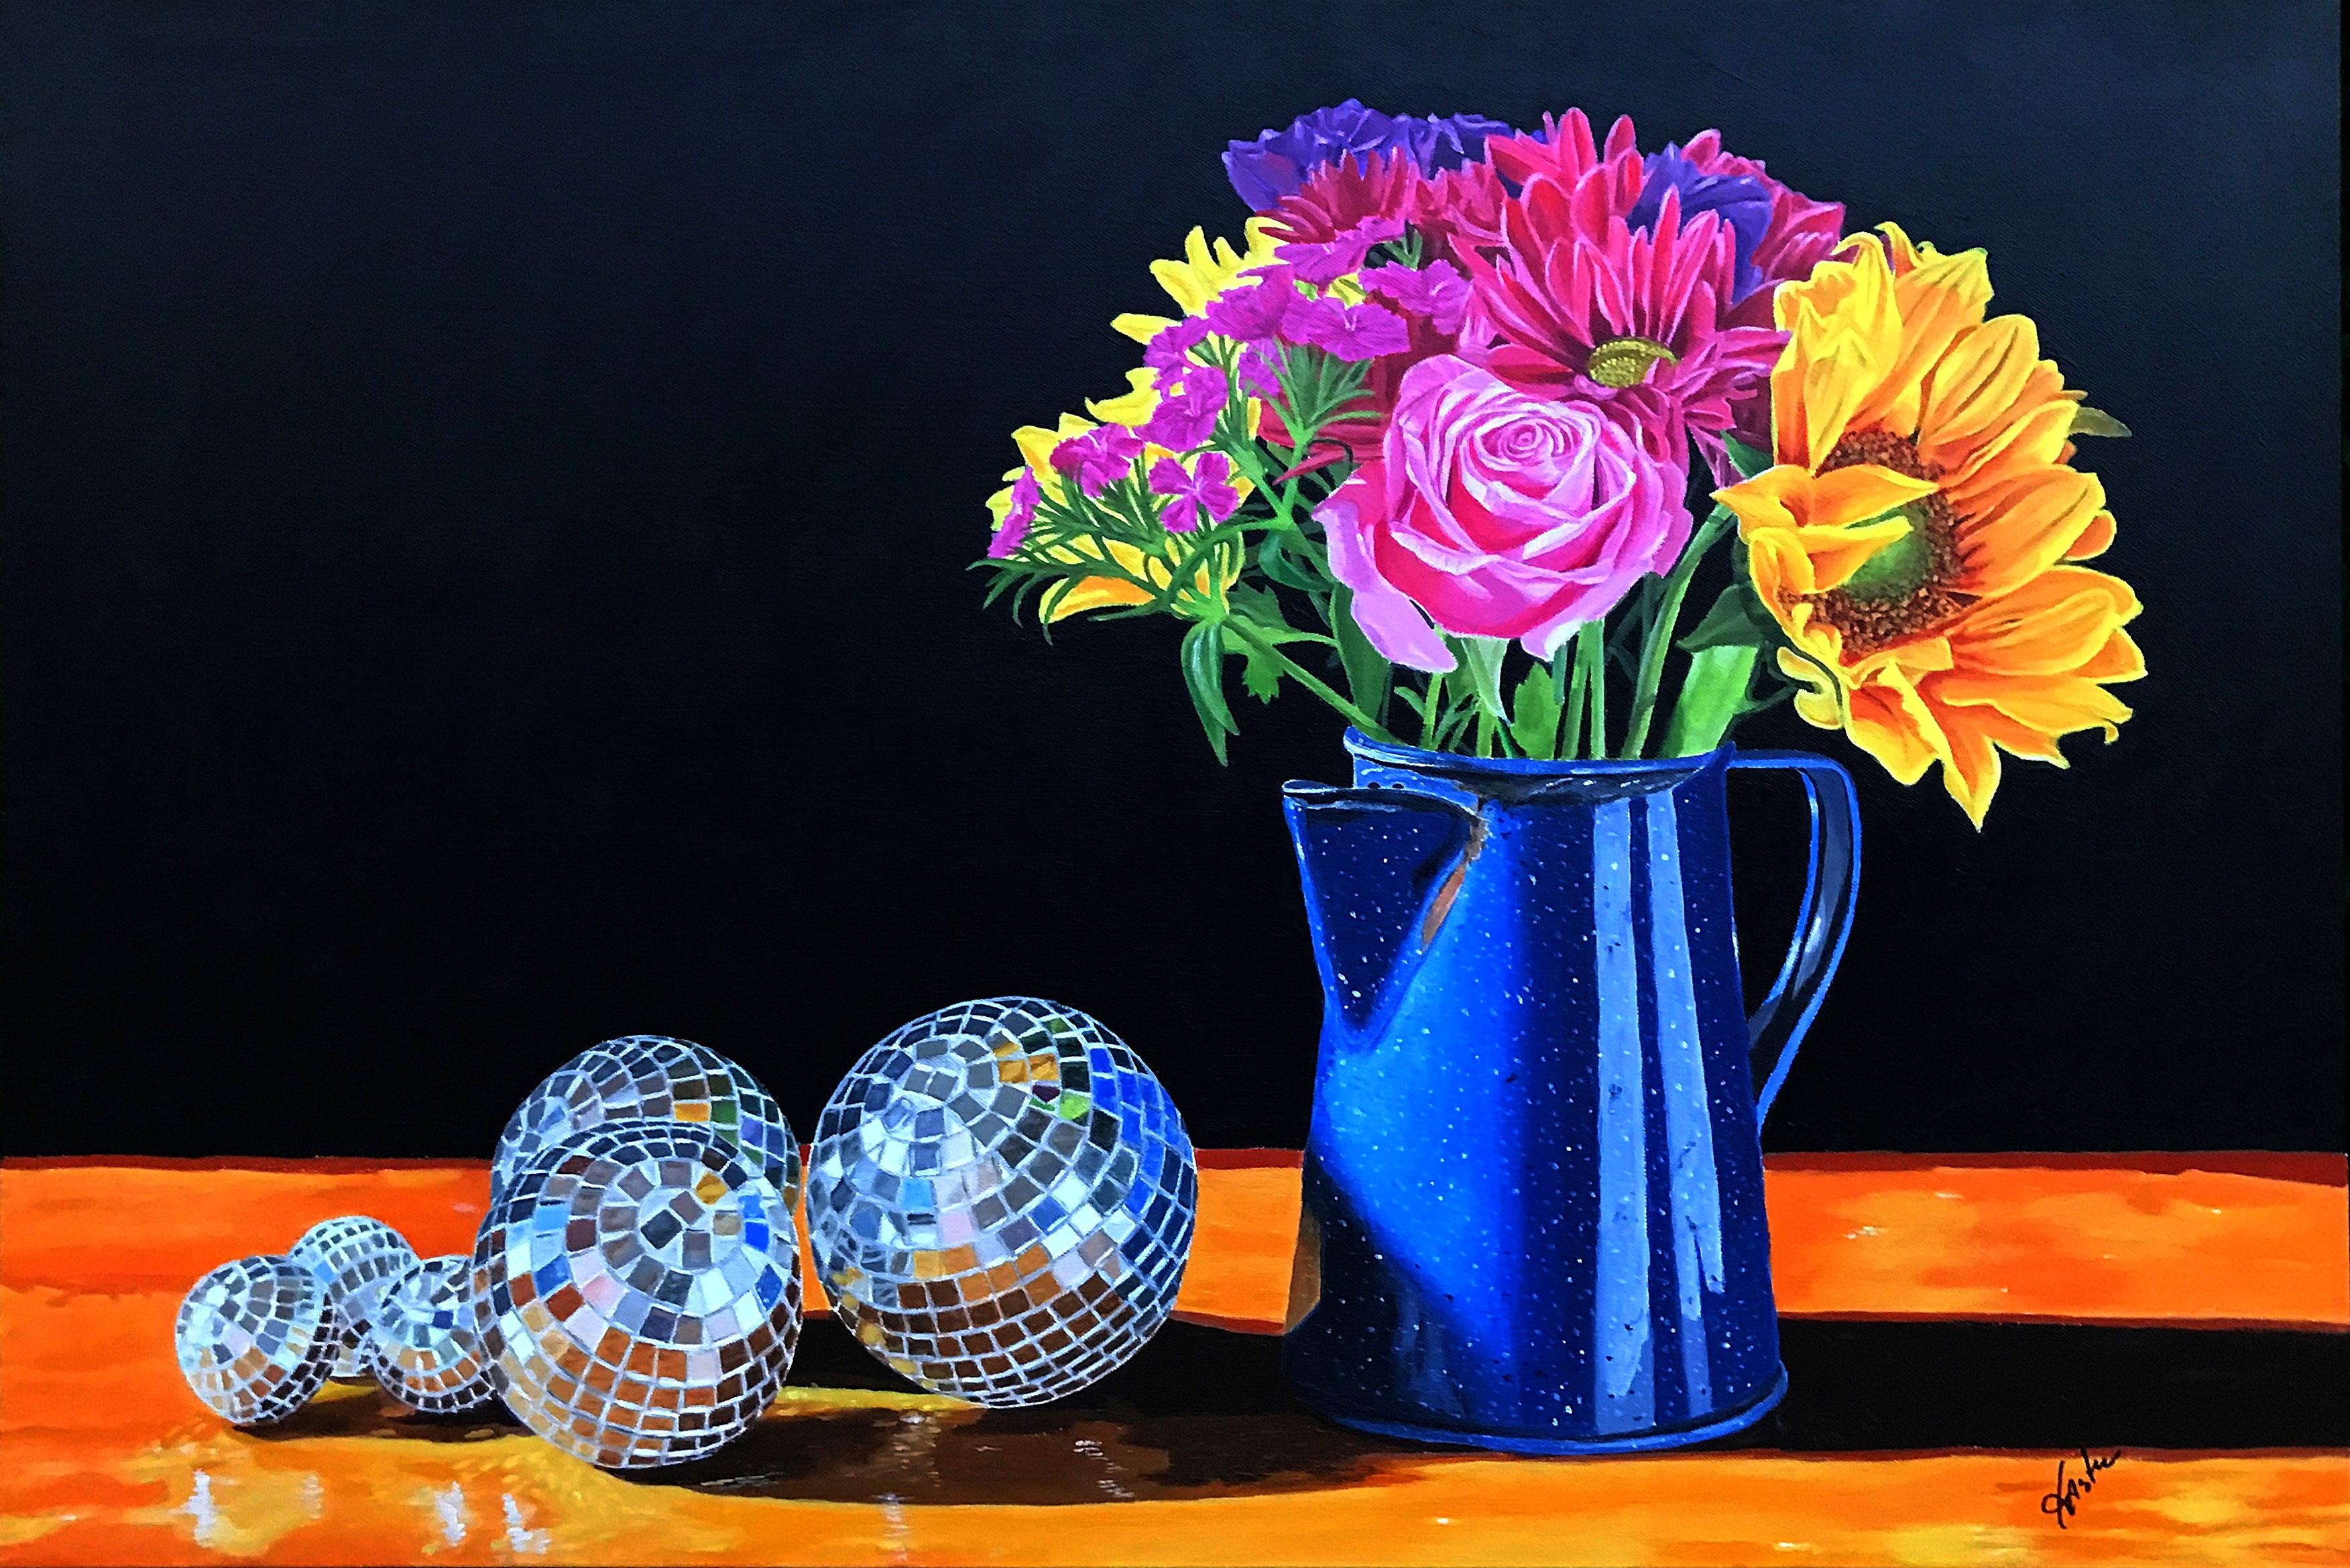 John Jaster Still-Life Painting - Coffee Pot with Glass Balls and Flowers, Original Painting